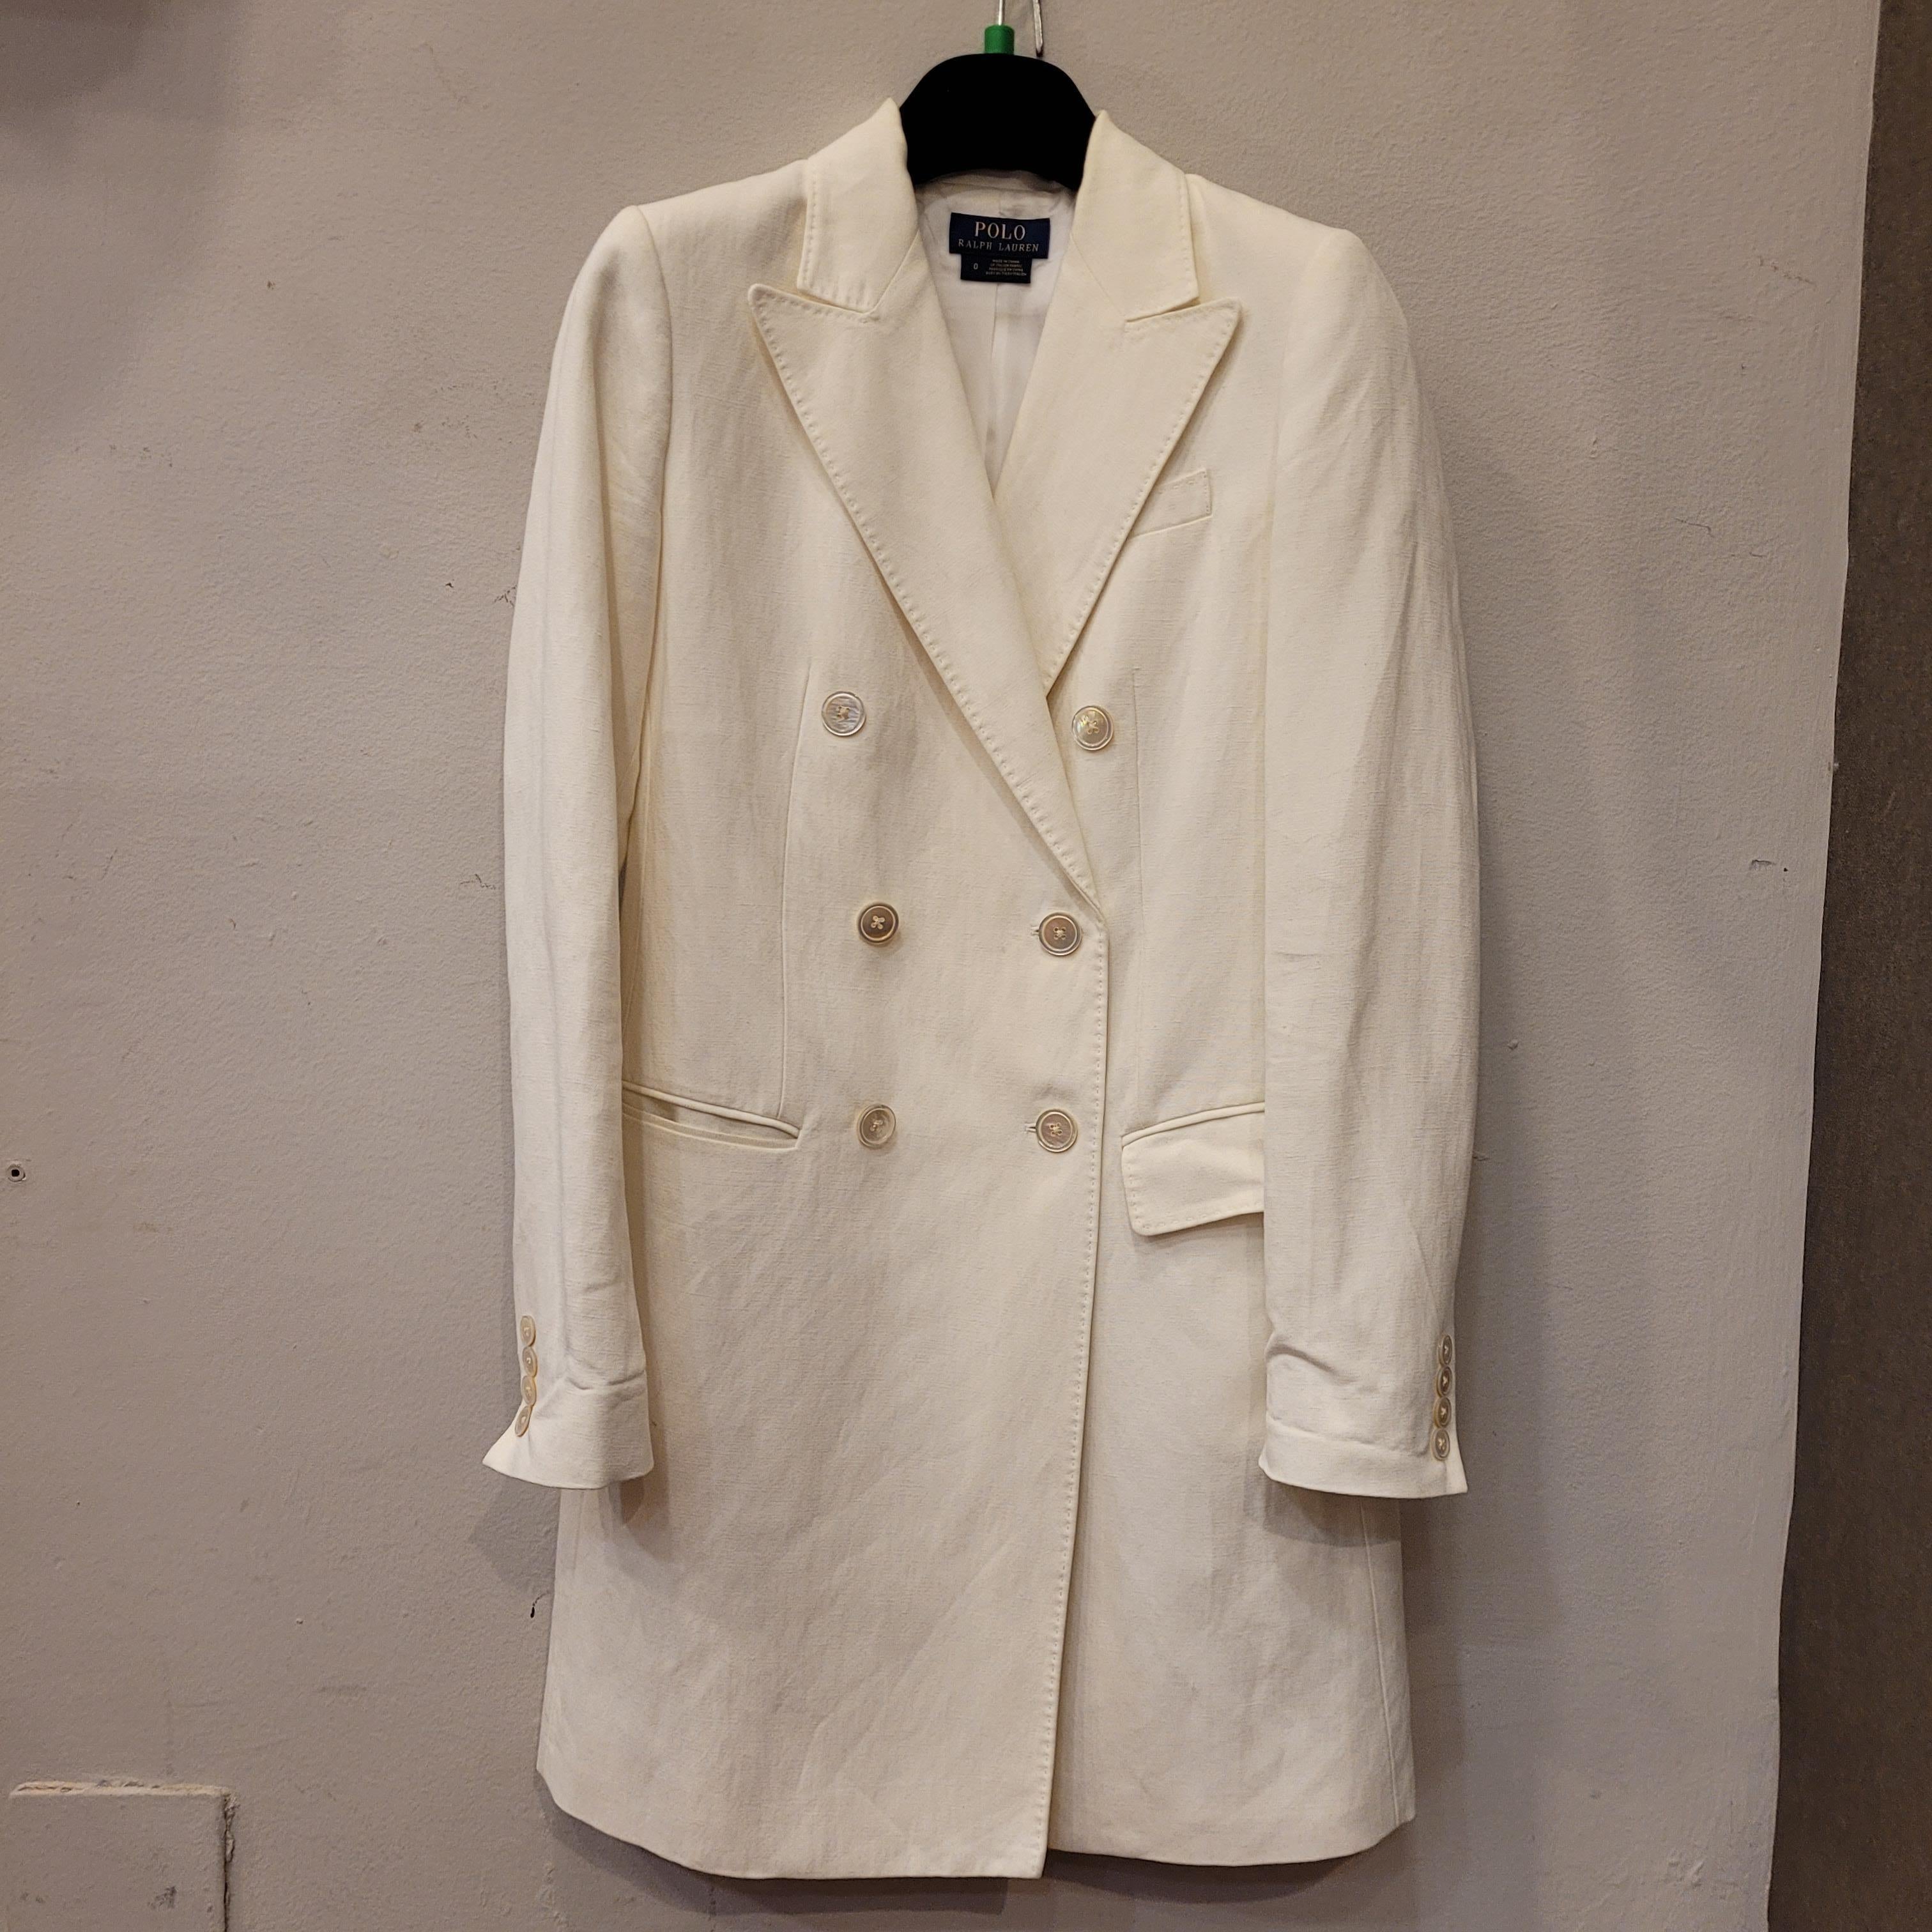 Short coat/wrap dress in linen with lapel and shoulder pads, off-white. Long sleeve by POLO RALPH LAUREN, collection summer 2021/2022
It only has one wear, almost new!!!!
Elegant and timeless like everything designed by the iconic American house